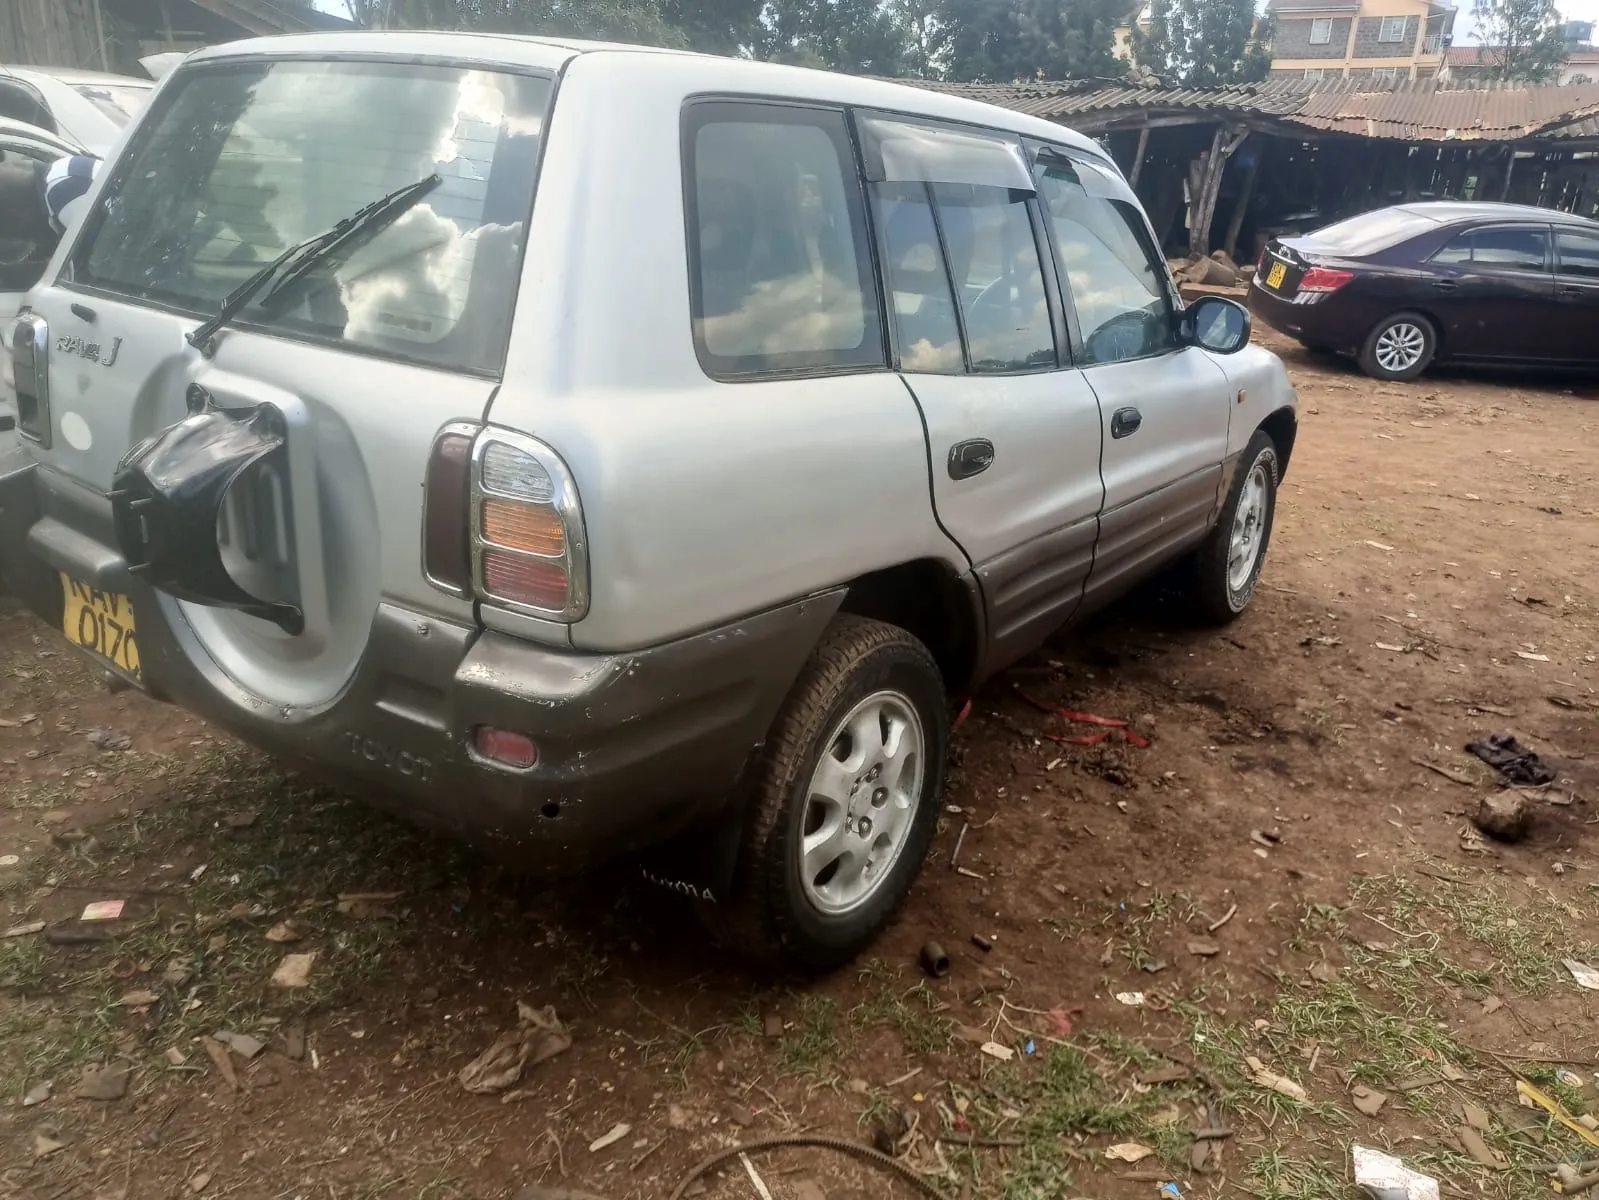 Toyota Rav4 for sale hire purchase as new